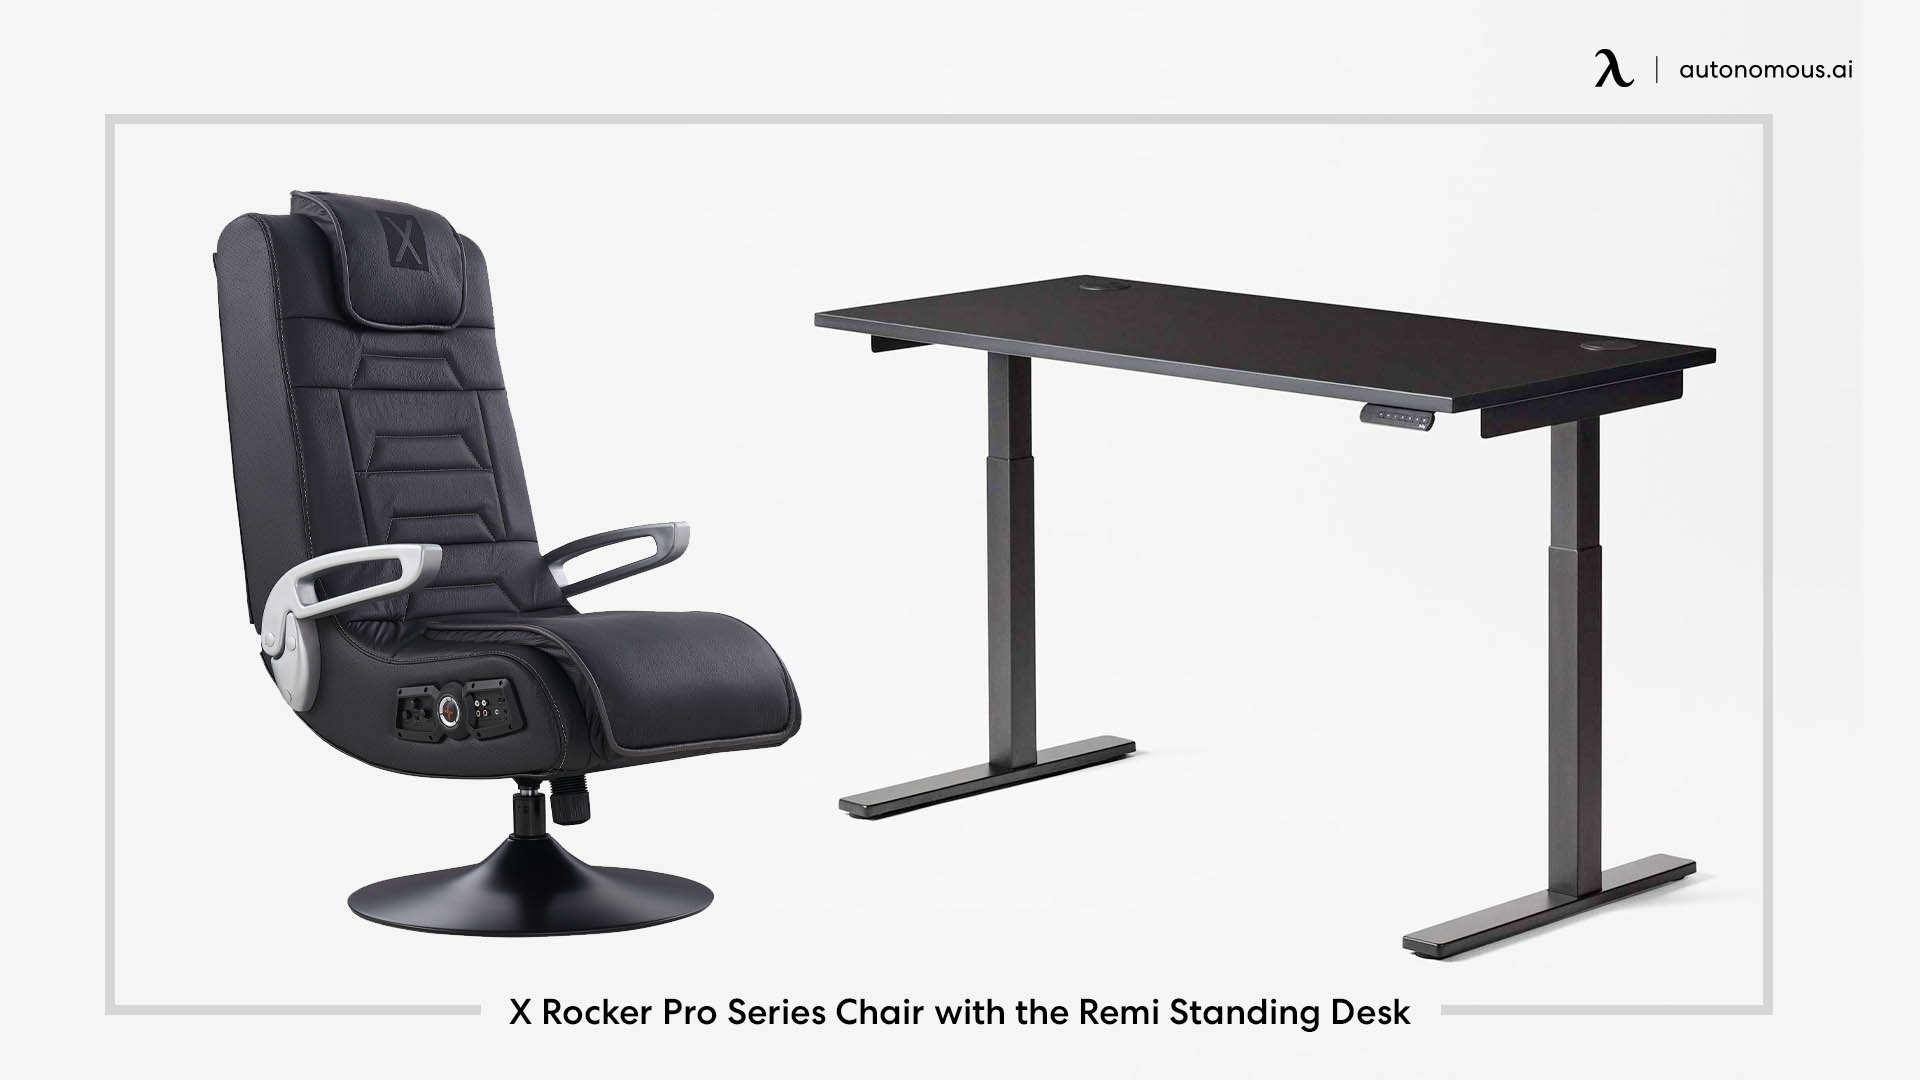 X Rocker Pro Series Chair with the Remi Standing Desk